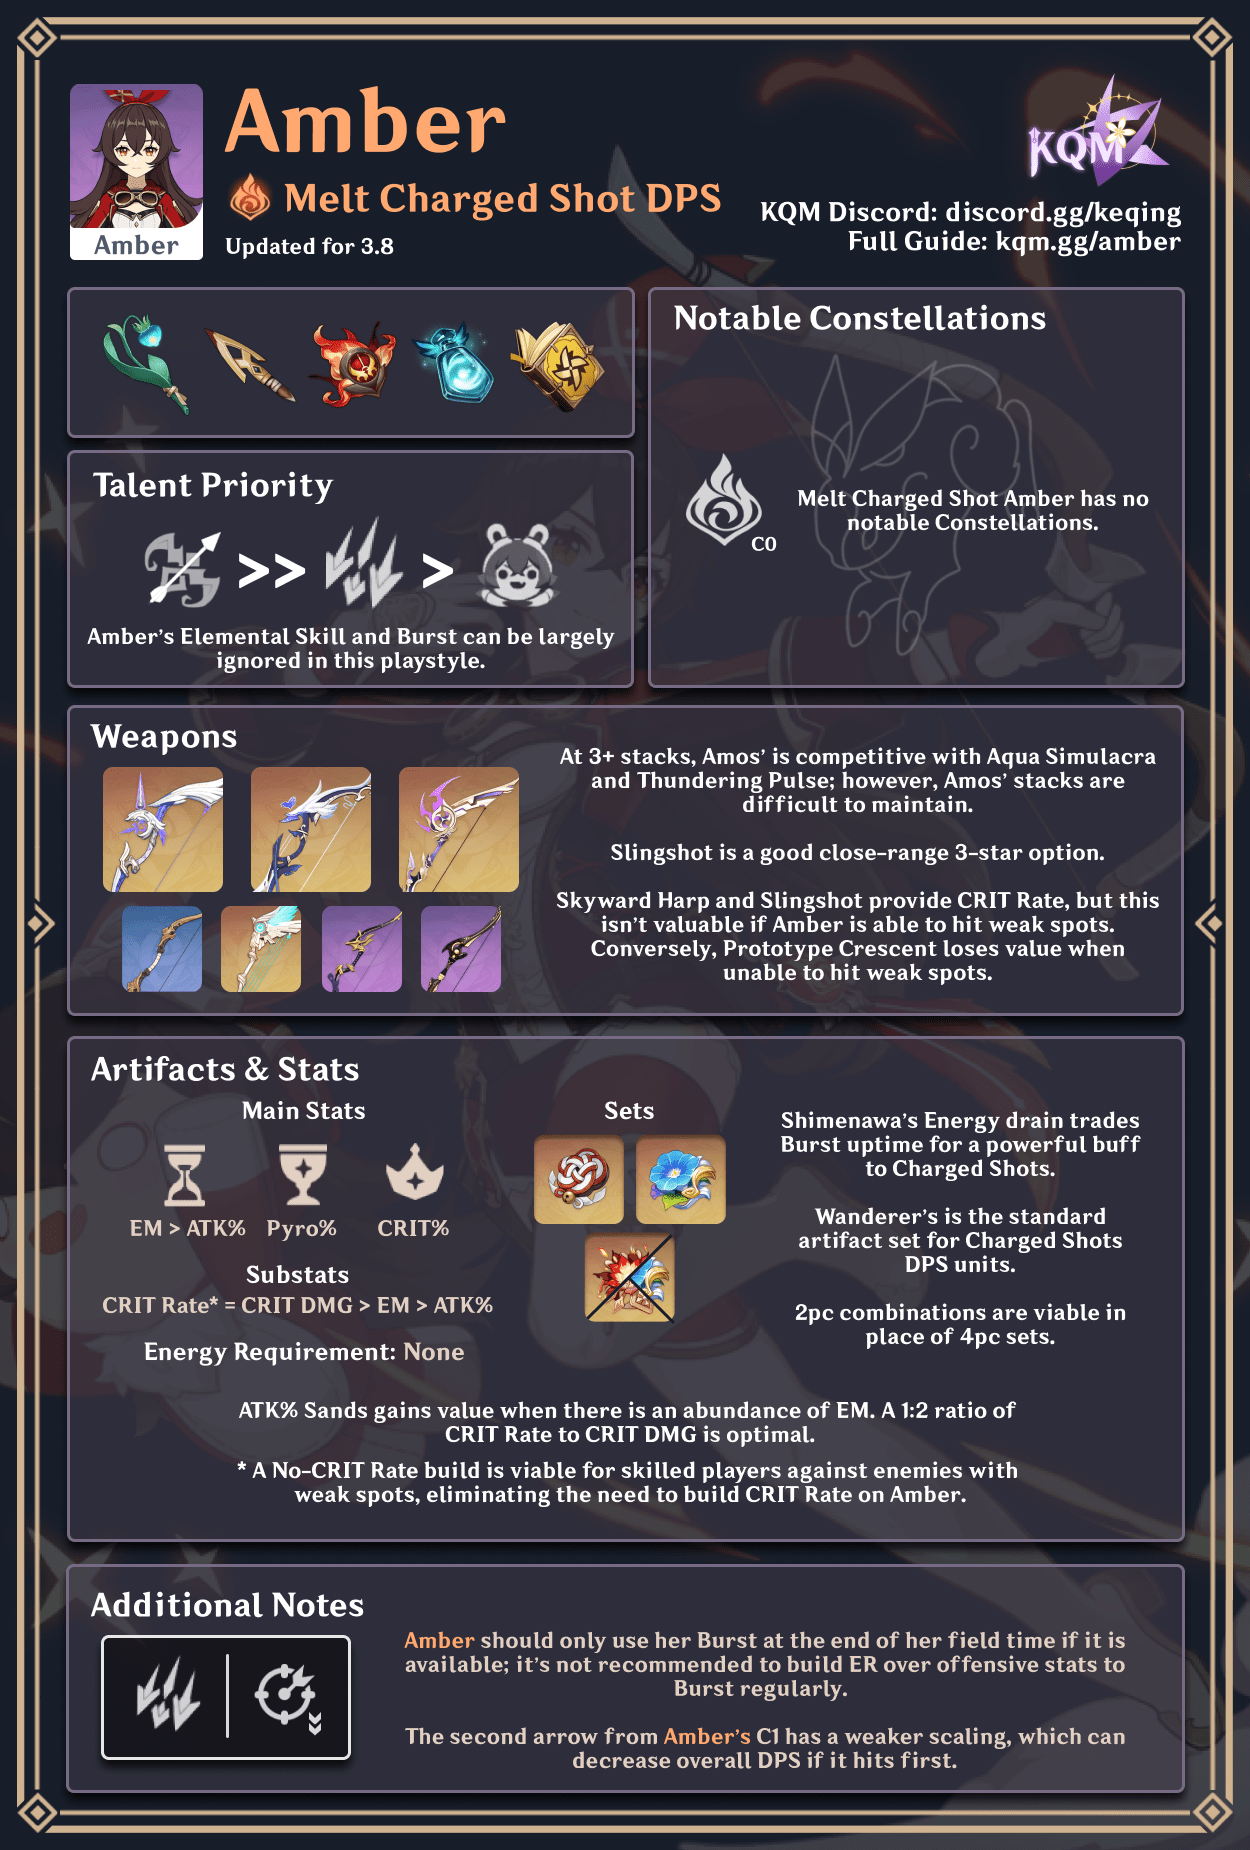 Amber Infographic Melt Charged Shot DPS